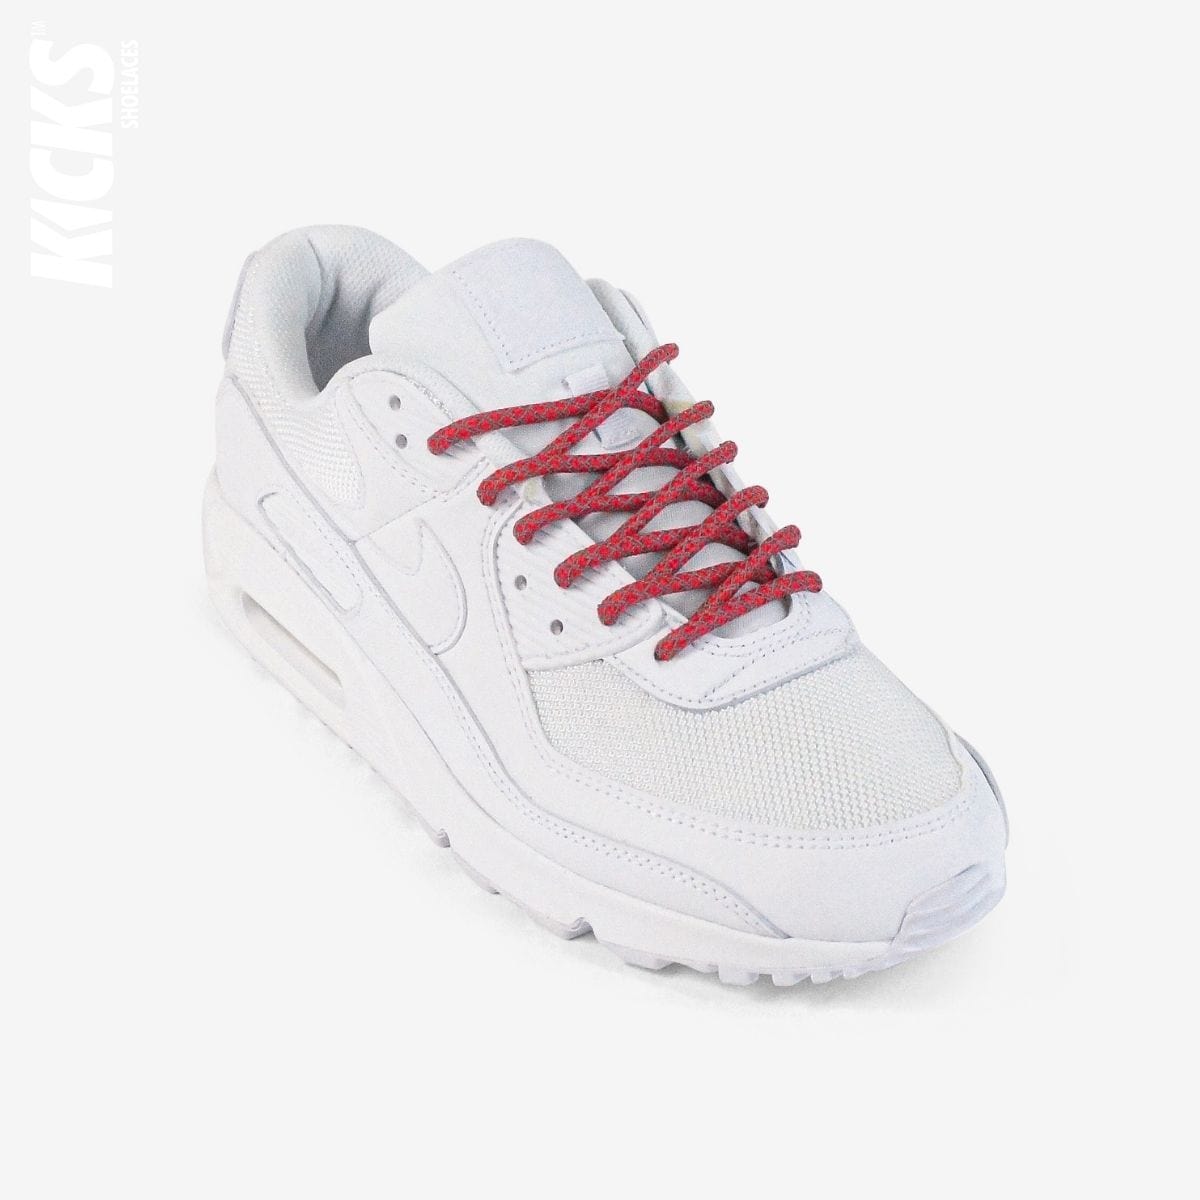 rope-laces-on-white-sneakers-with-kids-red-shoelaces